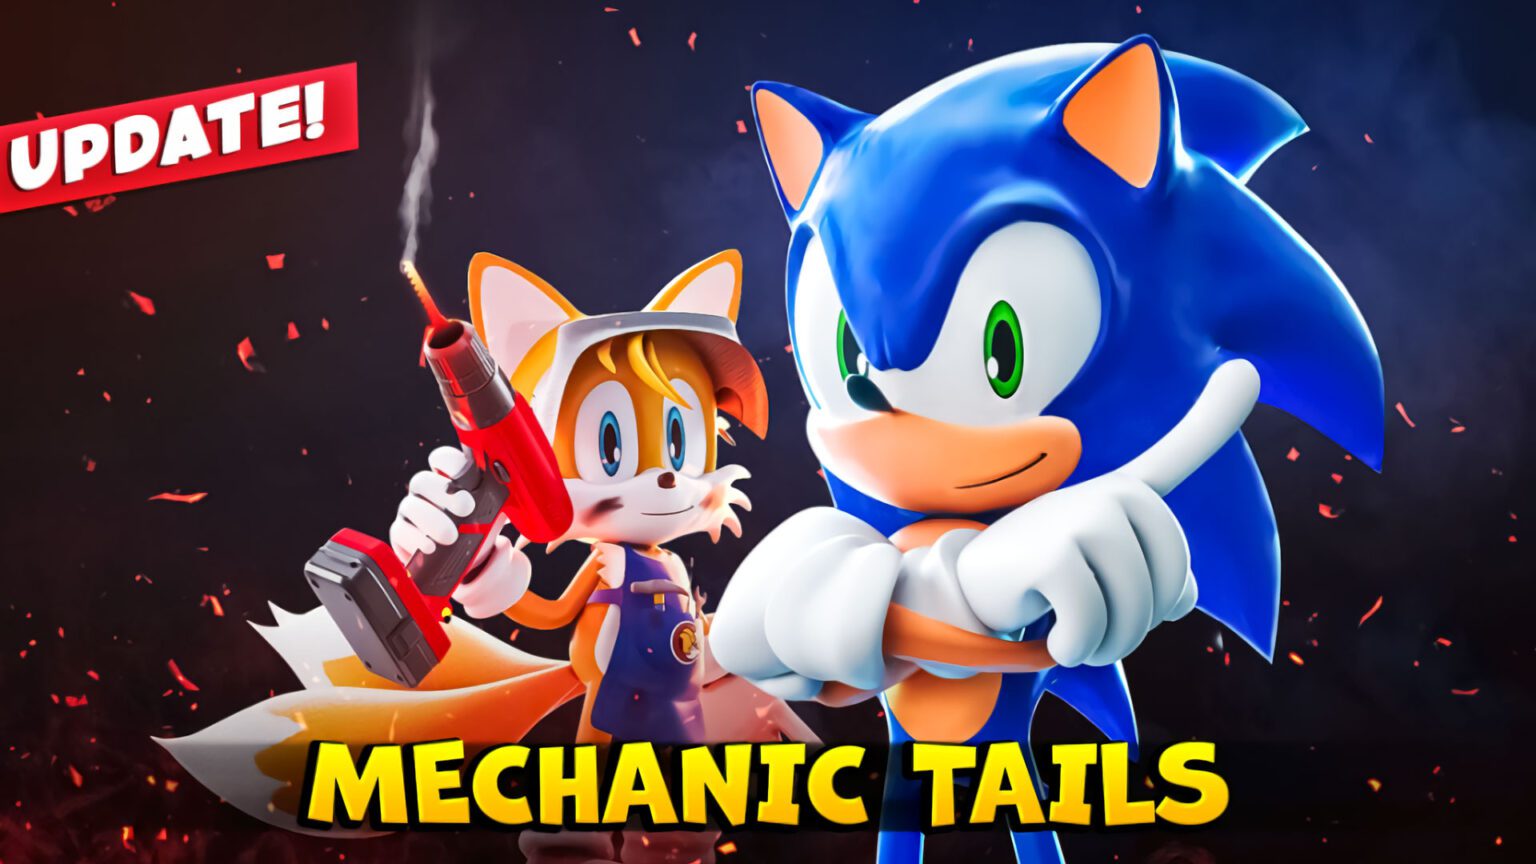 Mechanical Tails Update for Roblox Sonic Speed Simulator